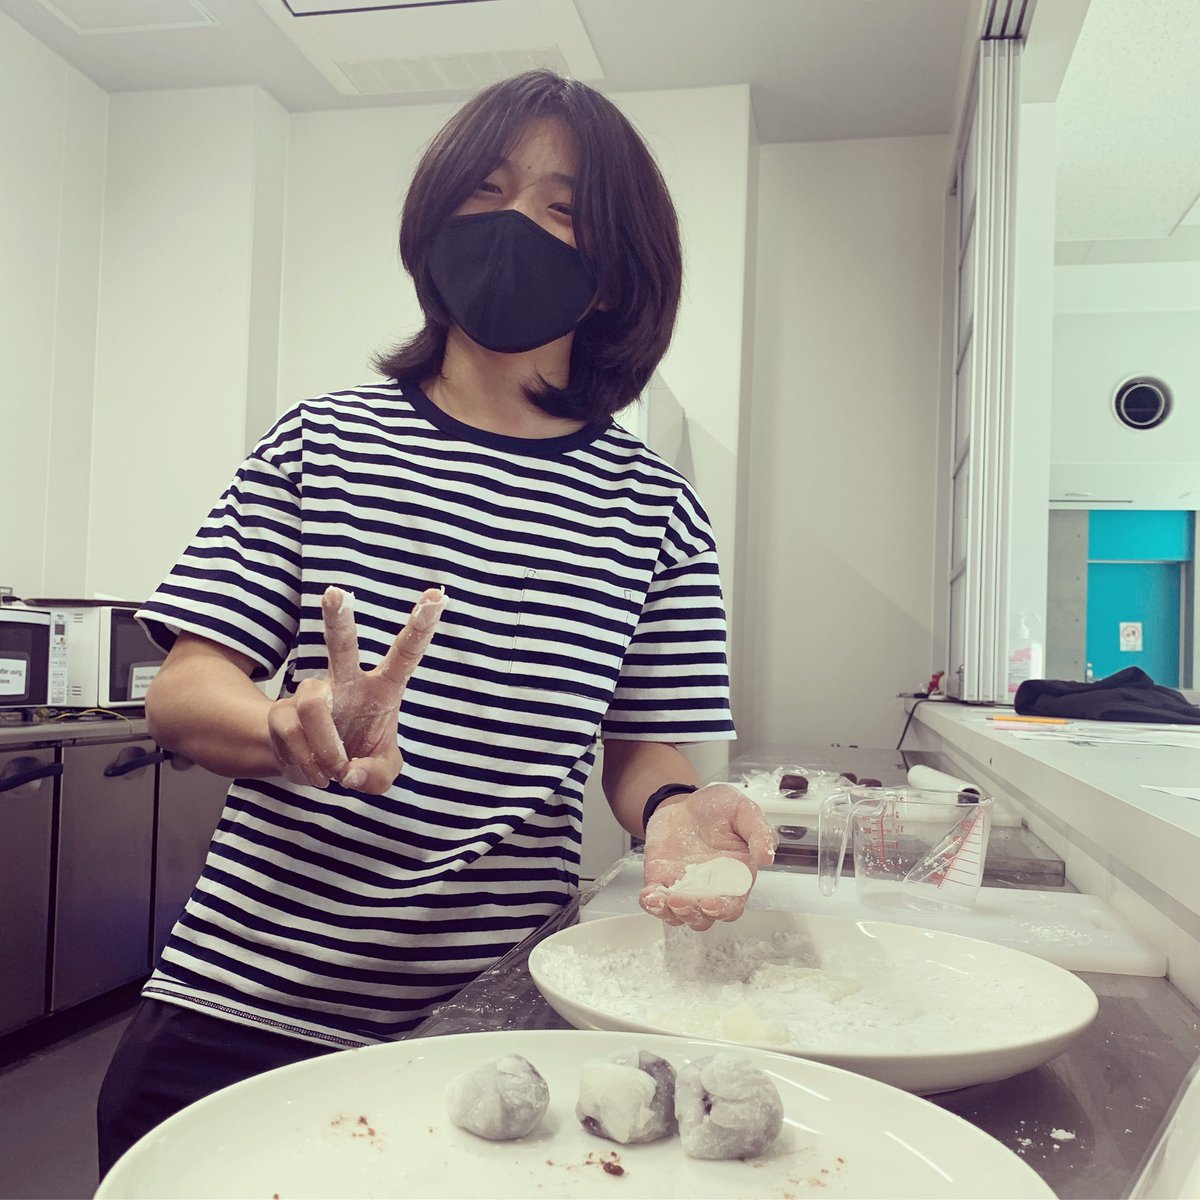 It’s wasn’t quite colorful hishi mochi, this Hinamatsuri, but Grade 7 did try making daifuku mochi. Sticky, but delicious. A perfect Friday treat as we finish our Foods of the World unit! #foodsoftheworld #internationalmindedness #snack #mochi #nisInquire